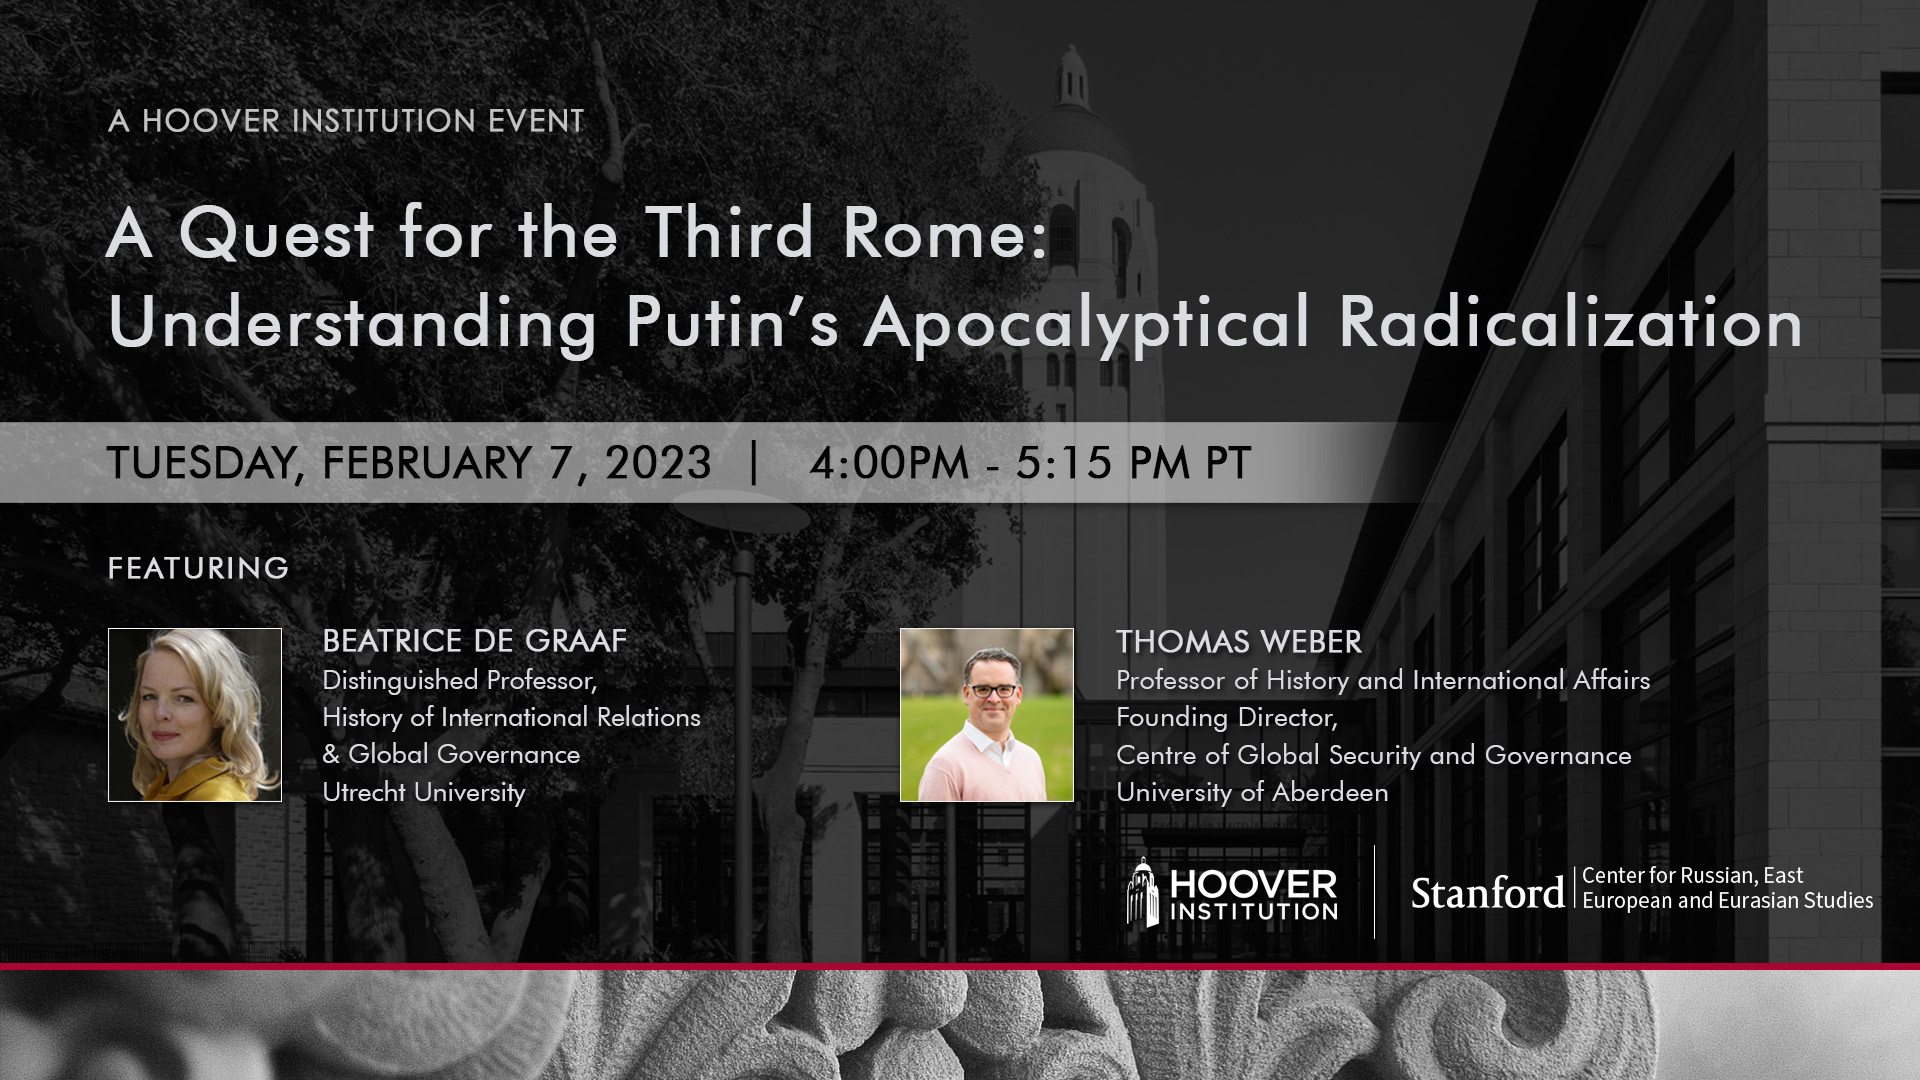 A Quest for the Third Rome: Understanding Putin’s Apocalyptical Radicalization